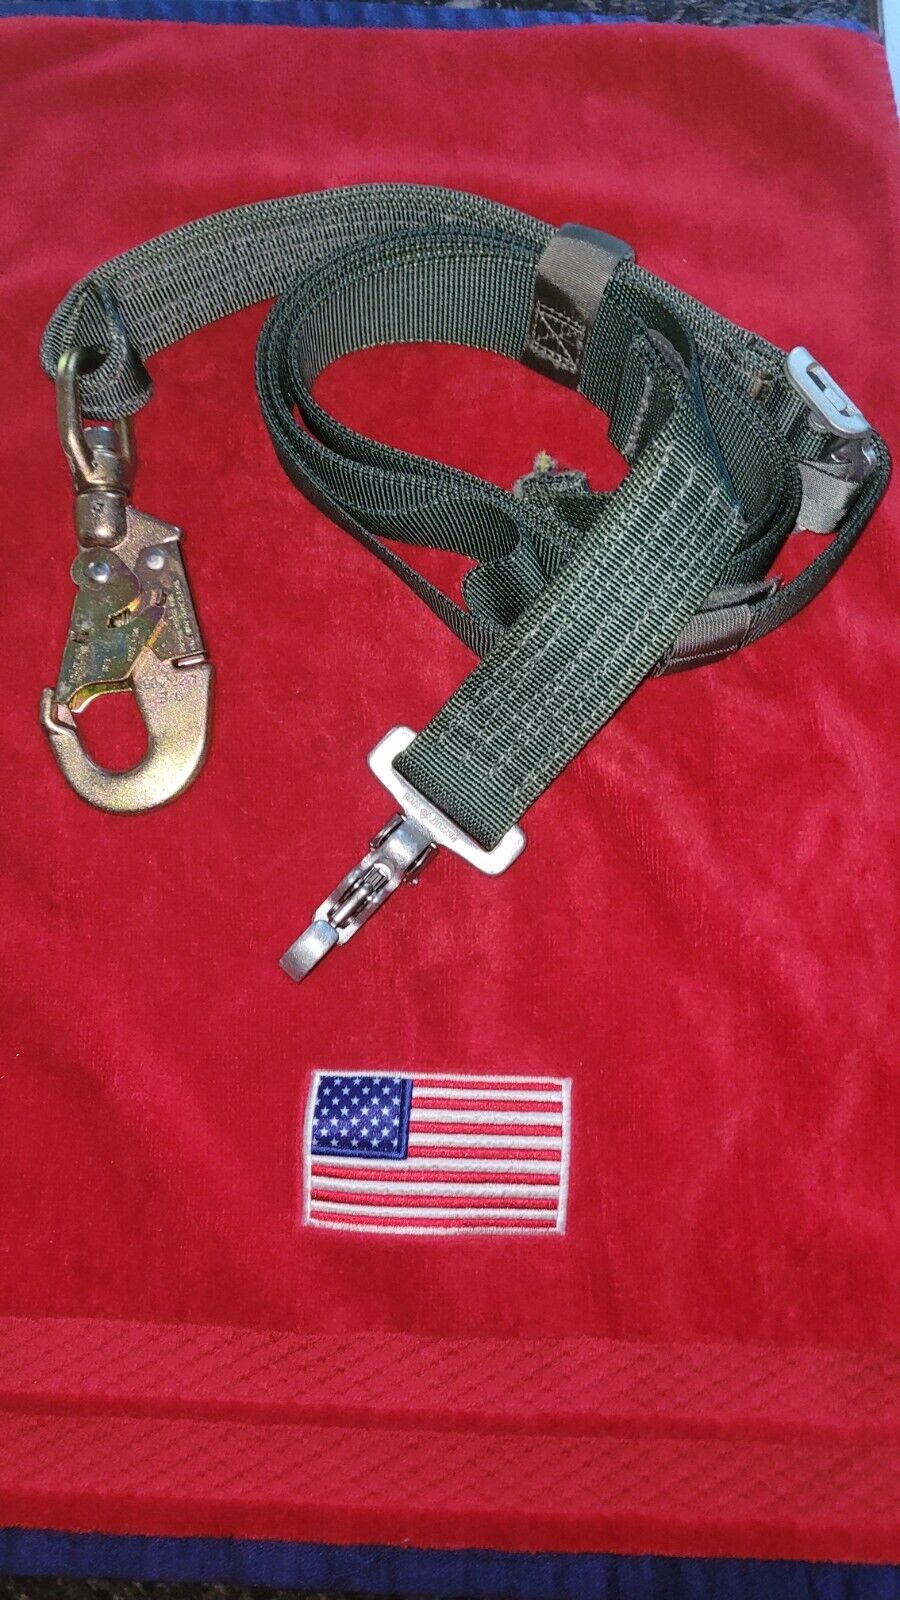 AIR WARRIOR PERSONAL RESTRAINT TETHER ARMY AVIATION UNISSUED NO PACKAGING 